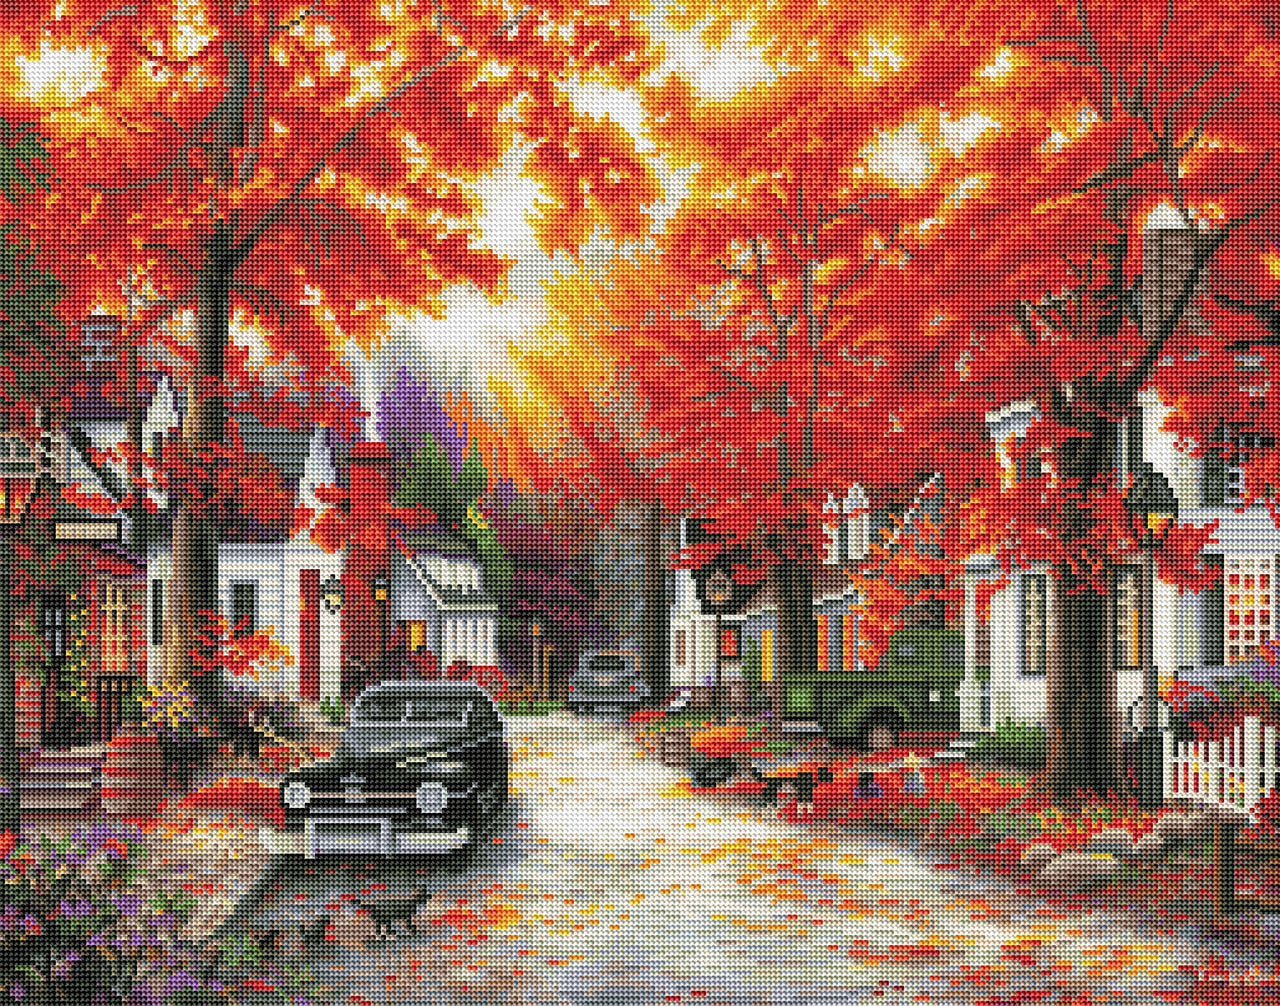 Diamond Painting A Moment on Memory Lane 28" x 22" (71cm x 56cm) / Round With 42 Colors Including 1 AB / 49,899